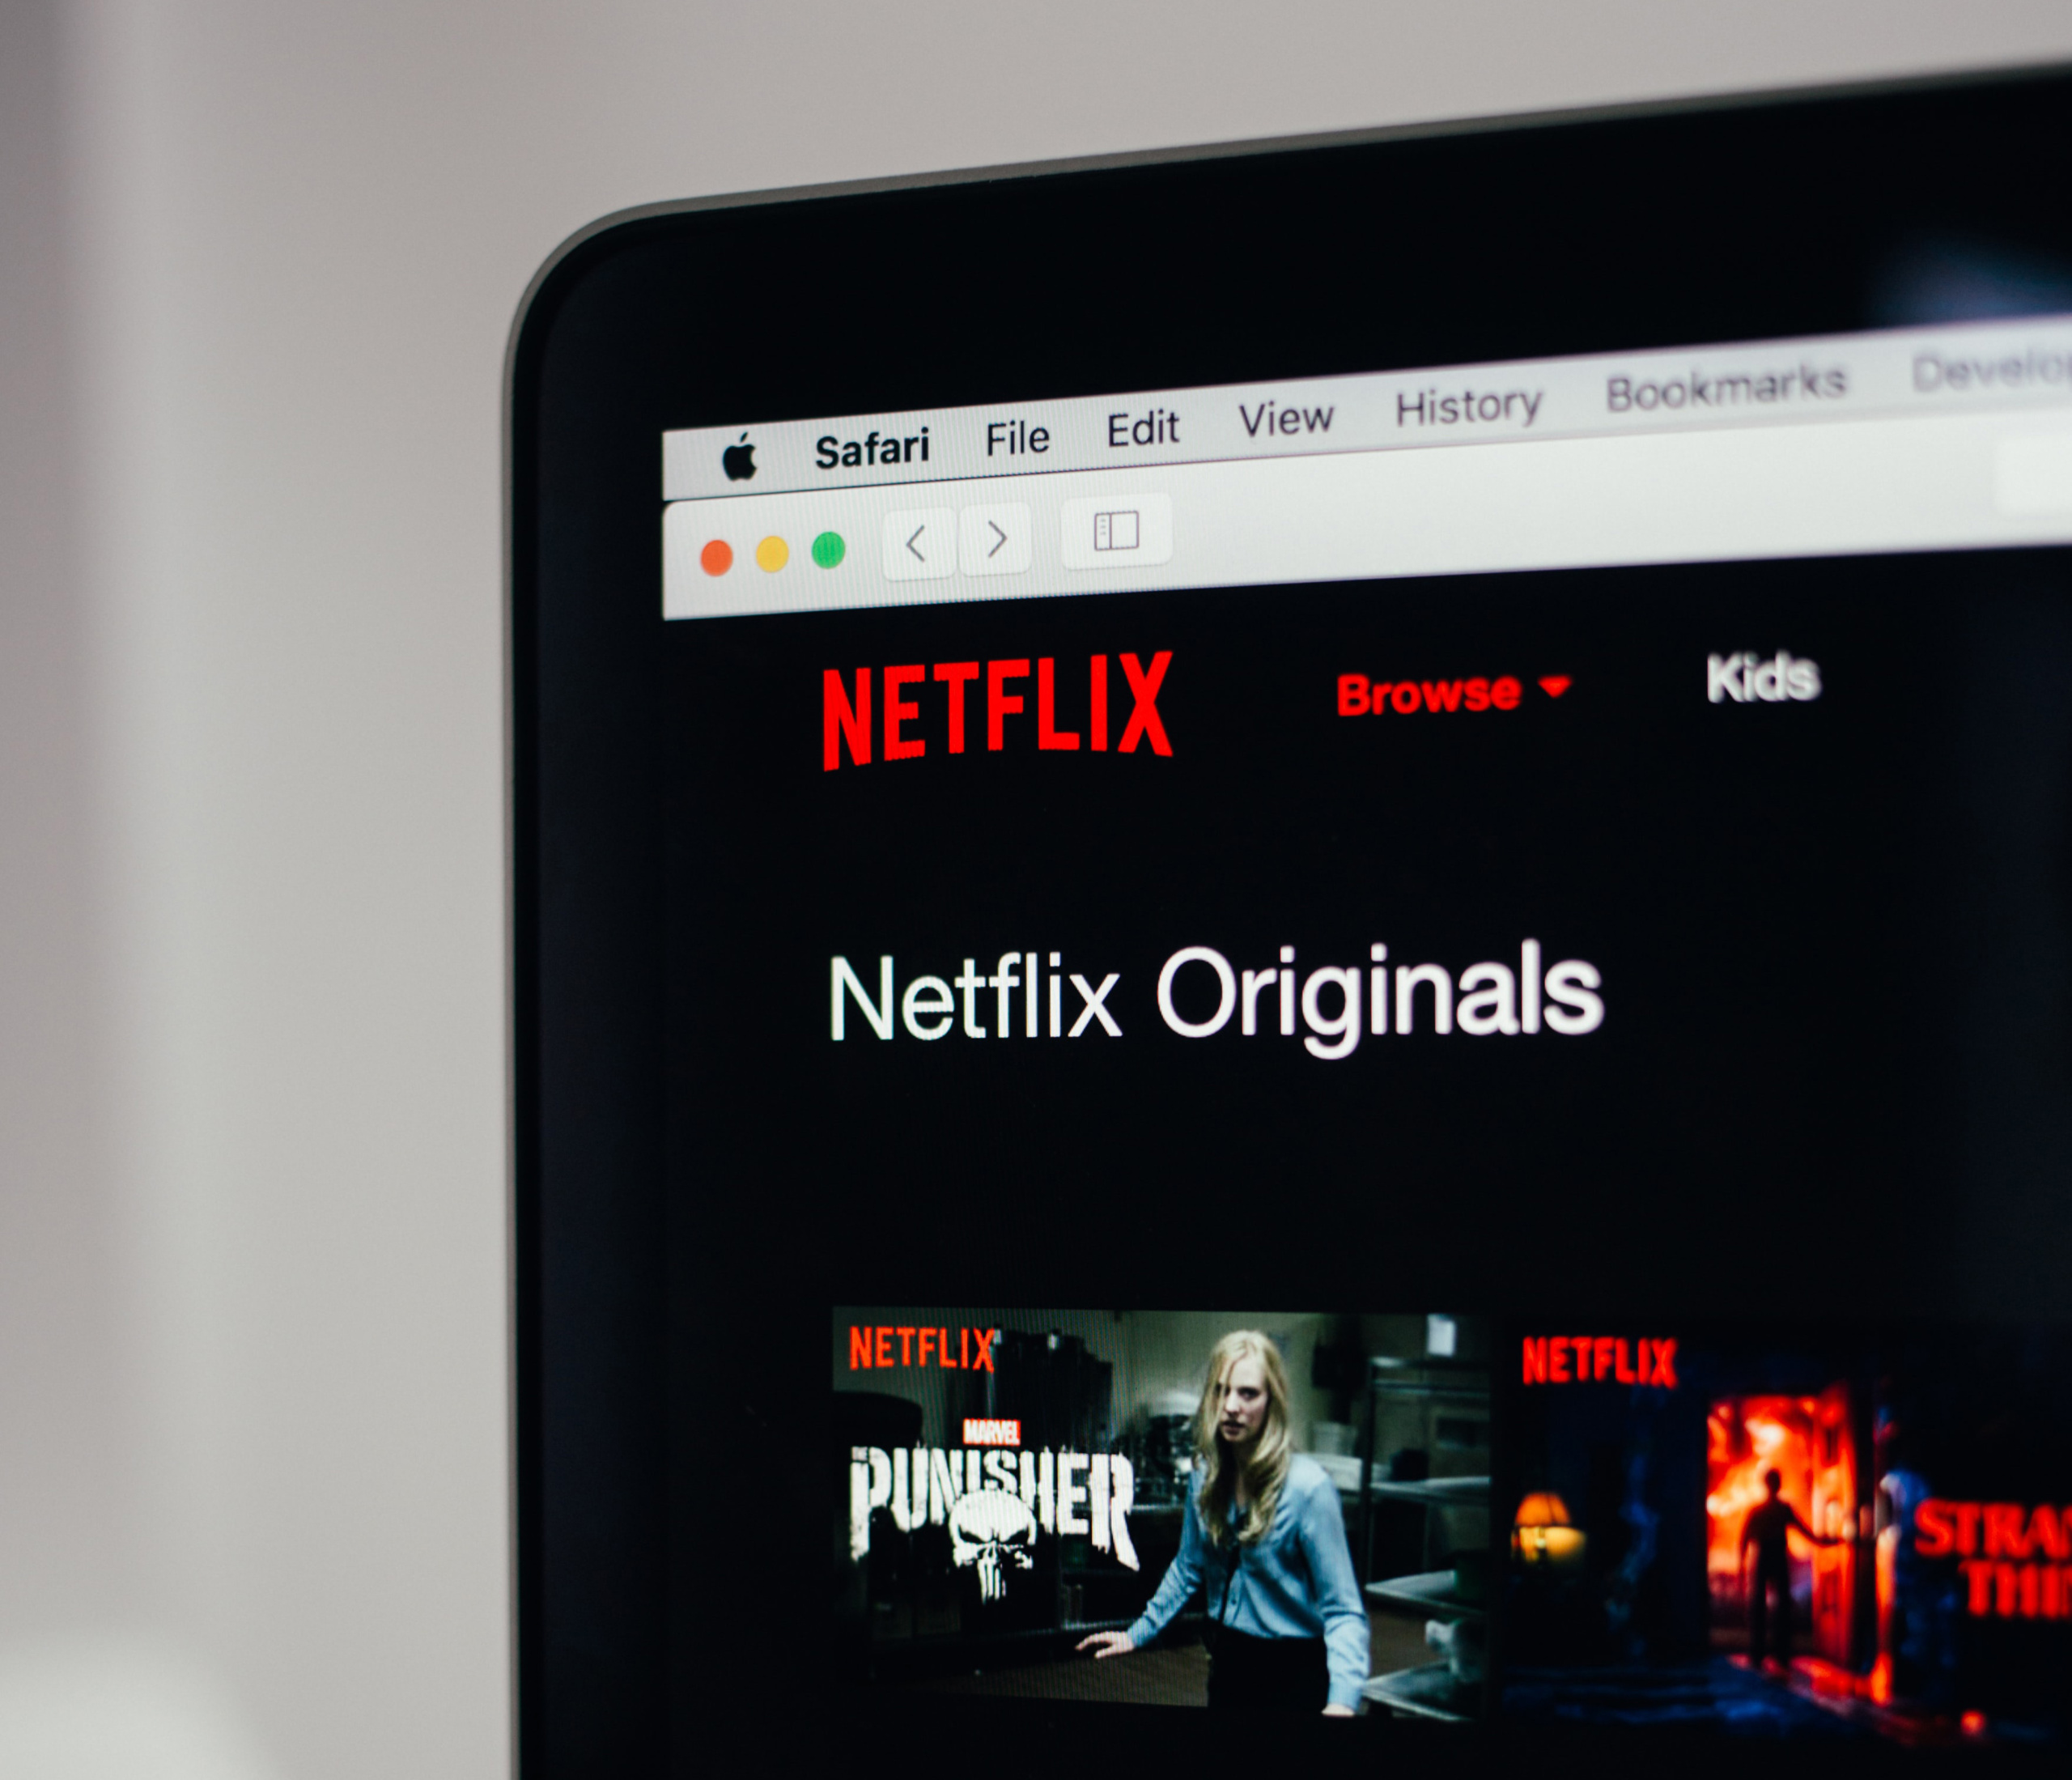 Ad-supported free Netflix plan will (probably) surprise you with no offline viewing and a limited catalog